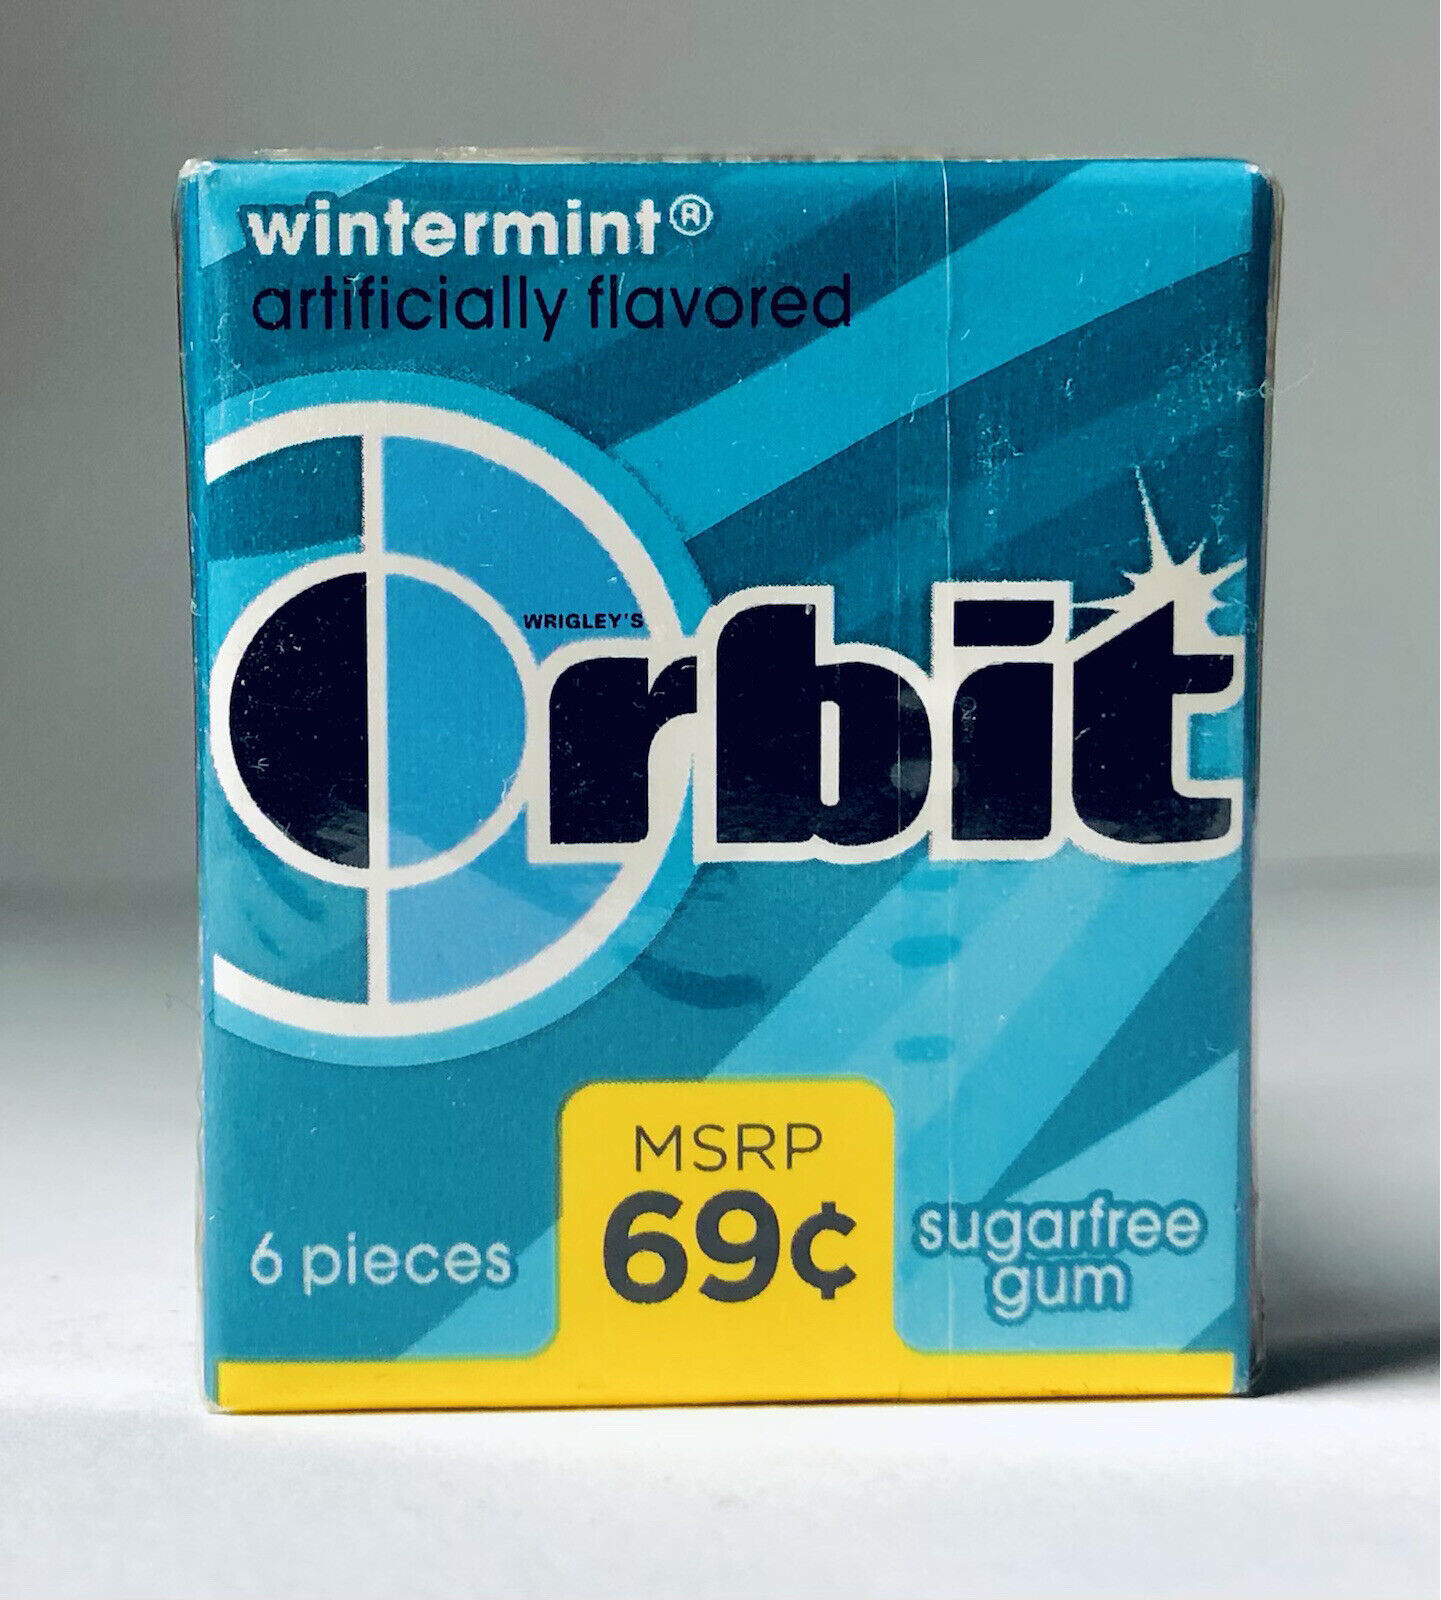 Vintage 2011 Wrigley’s ORBIT Gum Pack SEALED candy container WINTERMINT